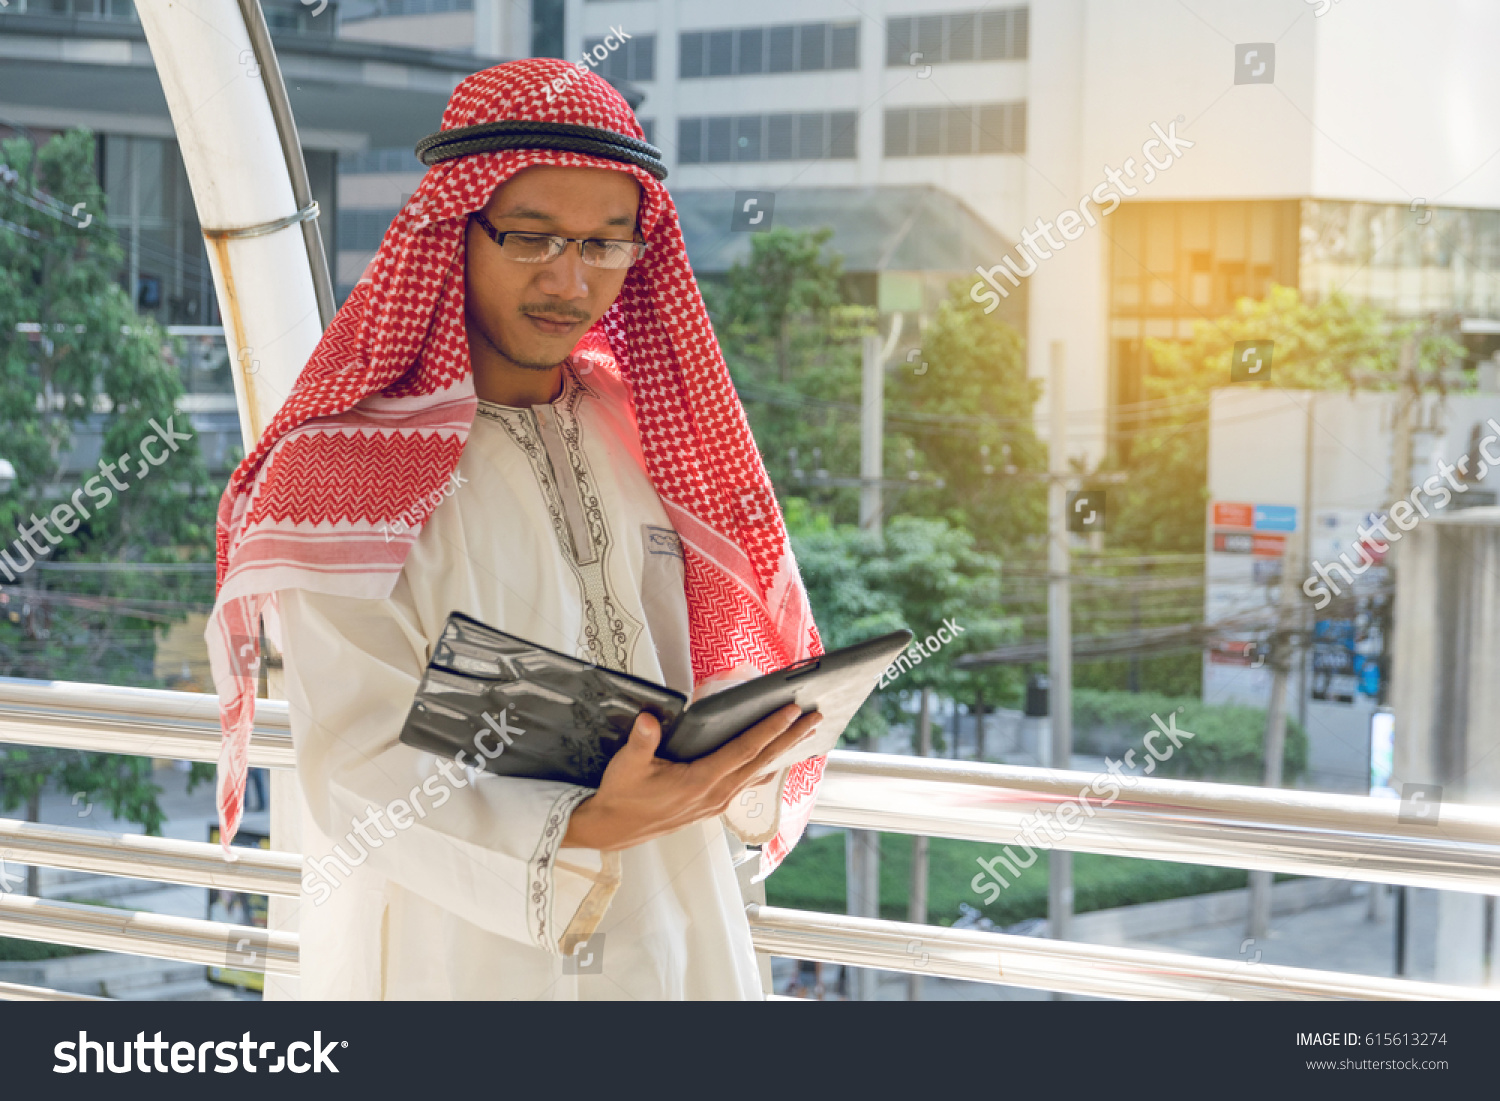 Arab businessman messaging on a mobile phone in the city #615613274